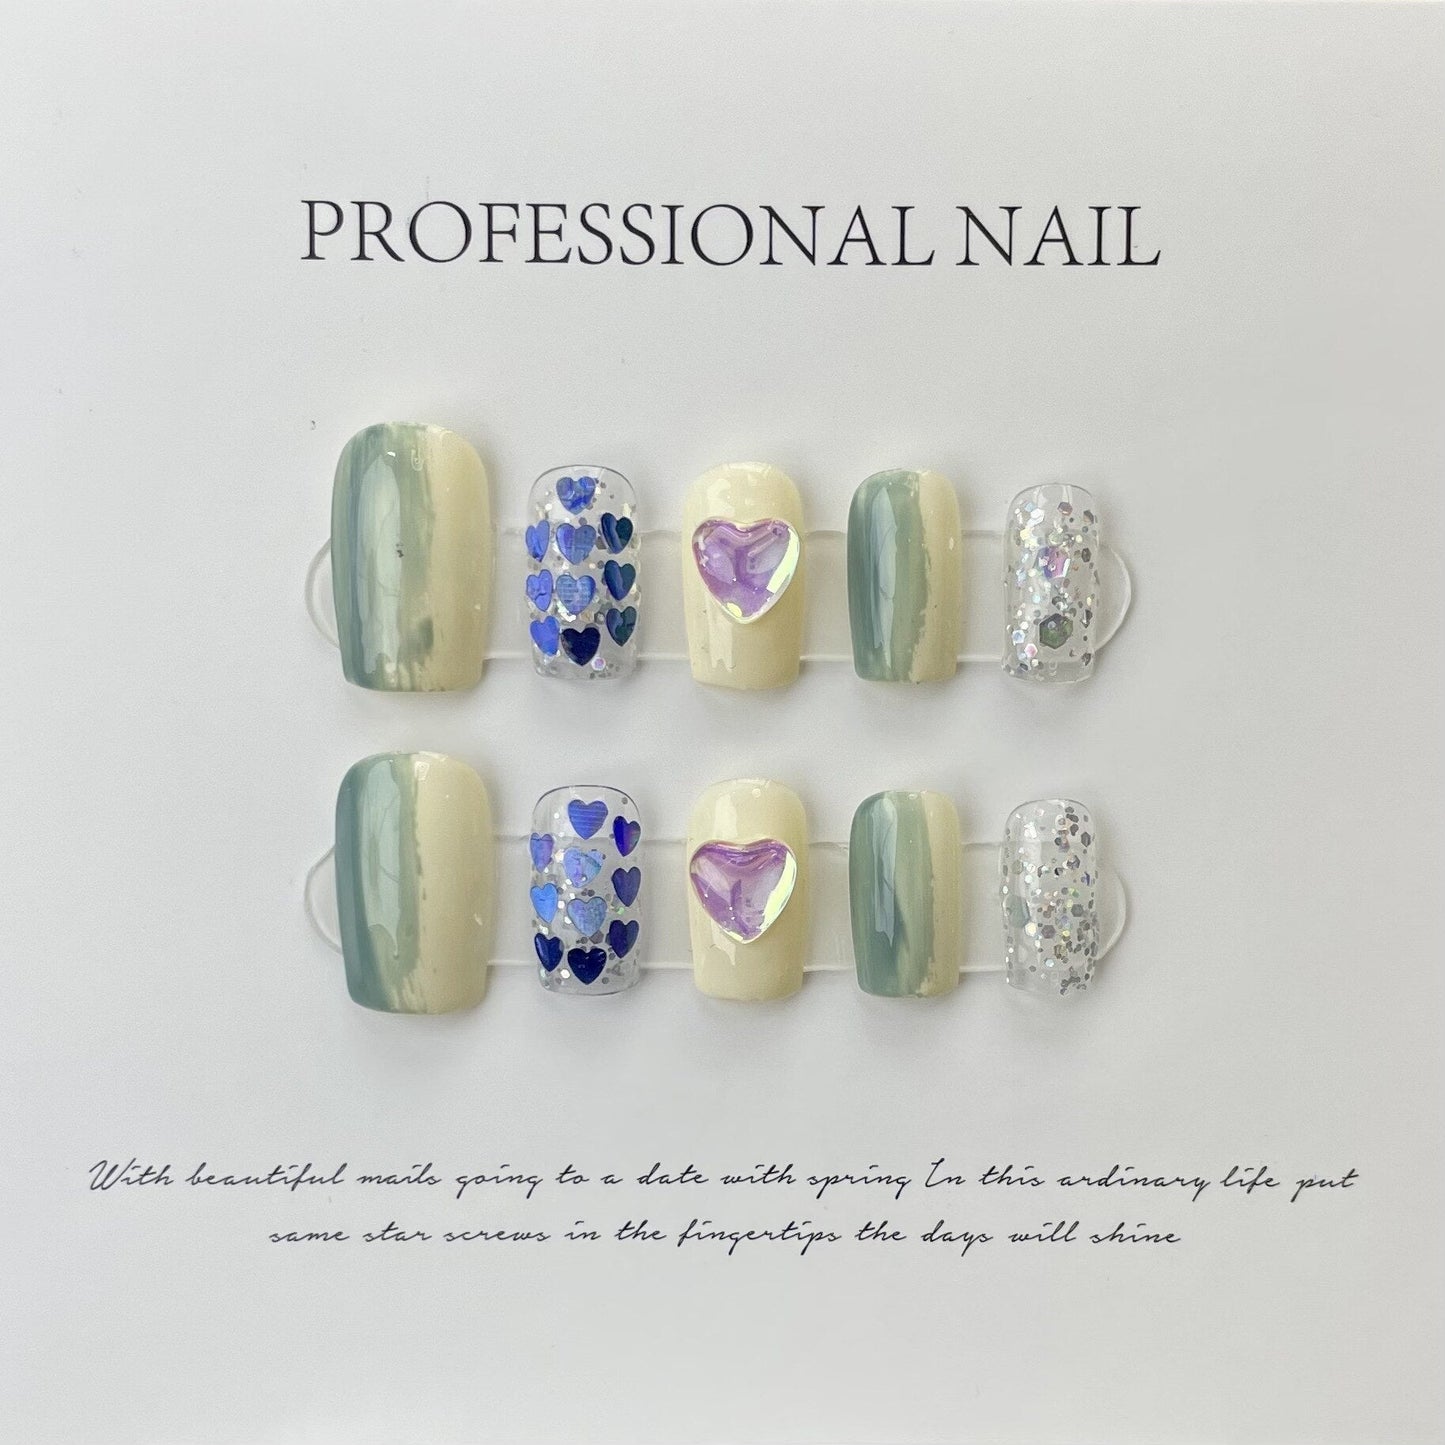 231-245 Number Ballerina Handmade False Nails Professional Wearable Nail Art With Glue Reusable Silver Butterfly Press on Nails